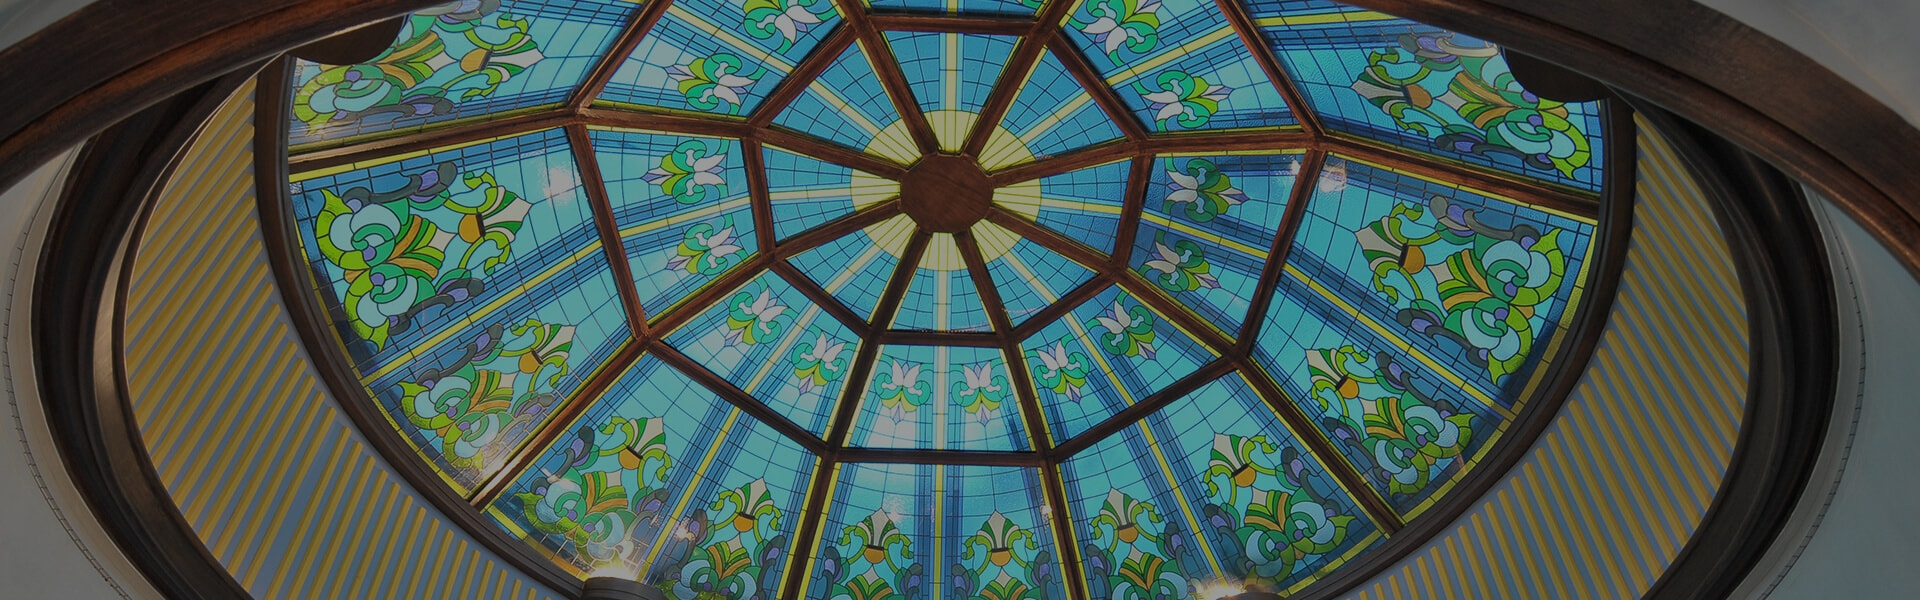 Everything You Need To Know About Stained Glass Artistry